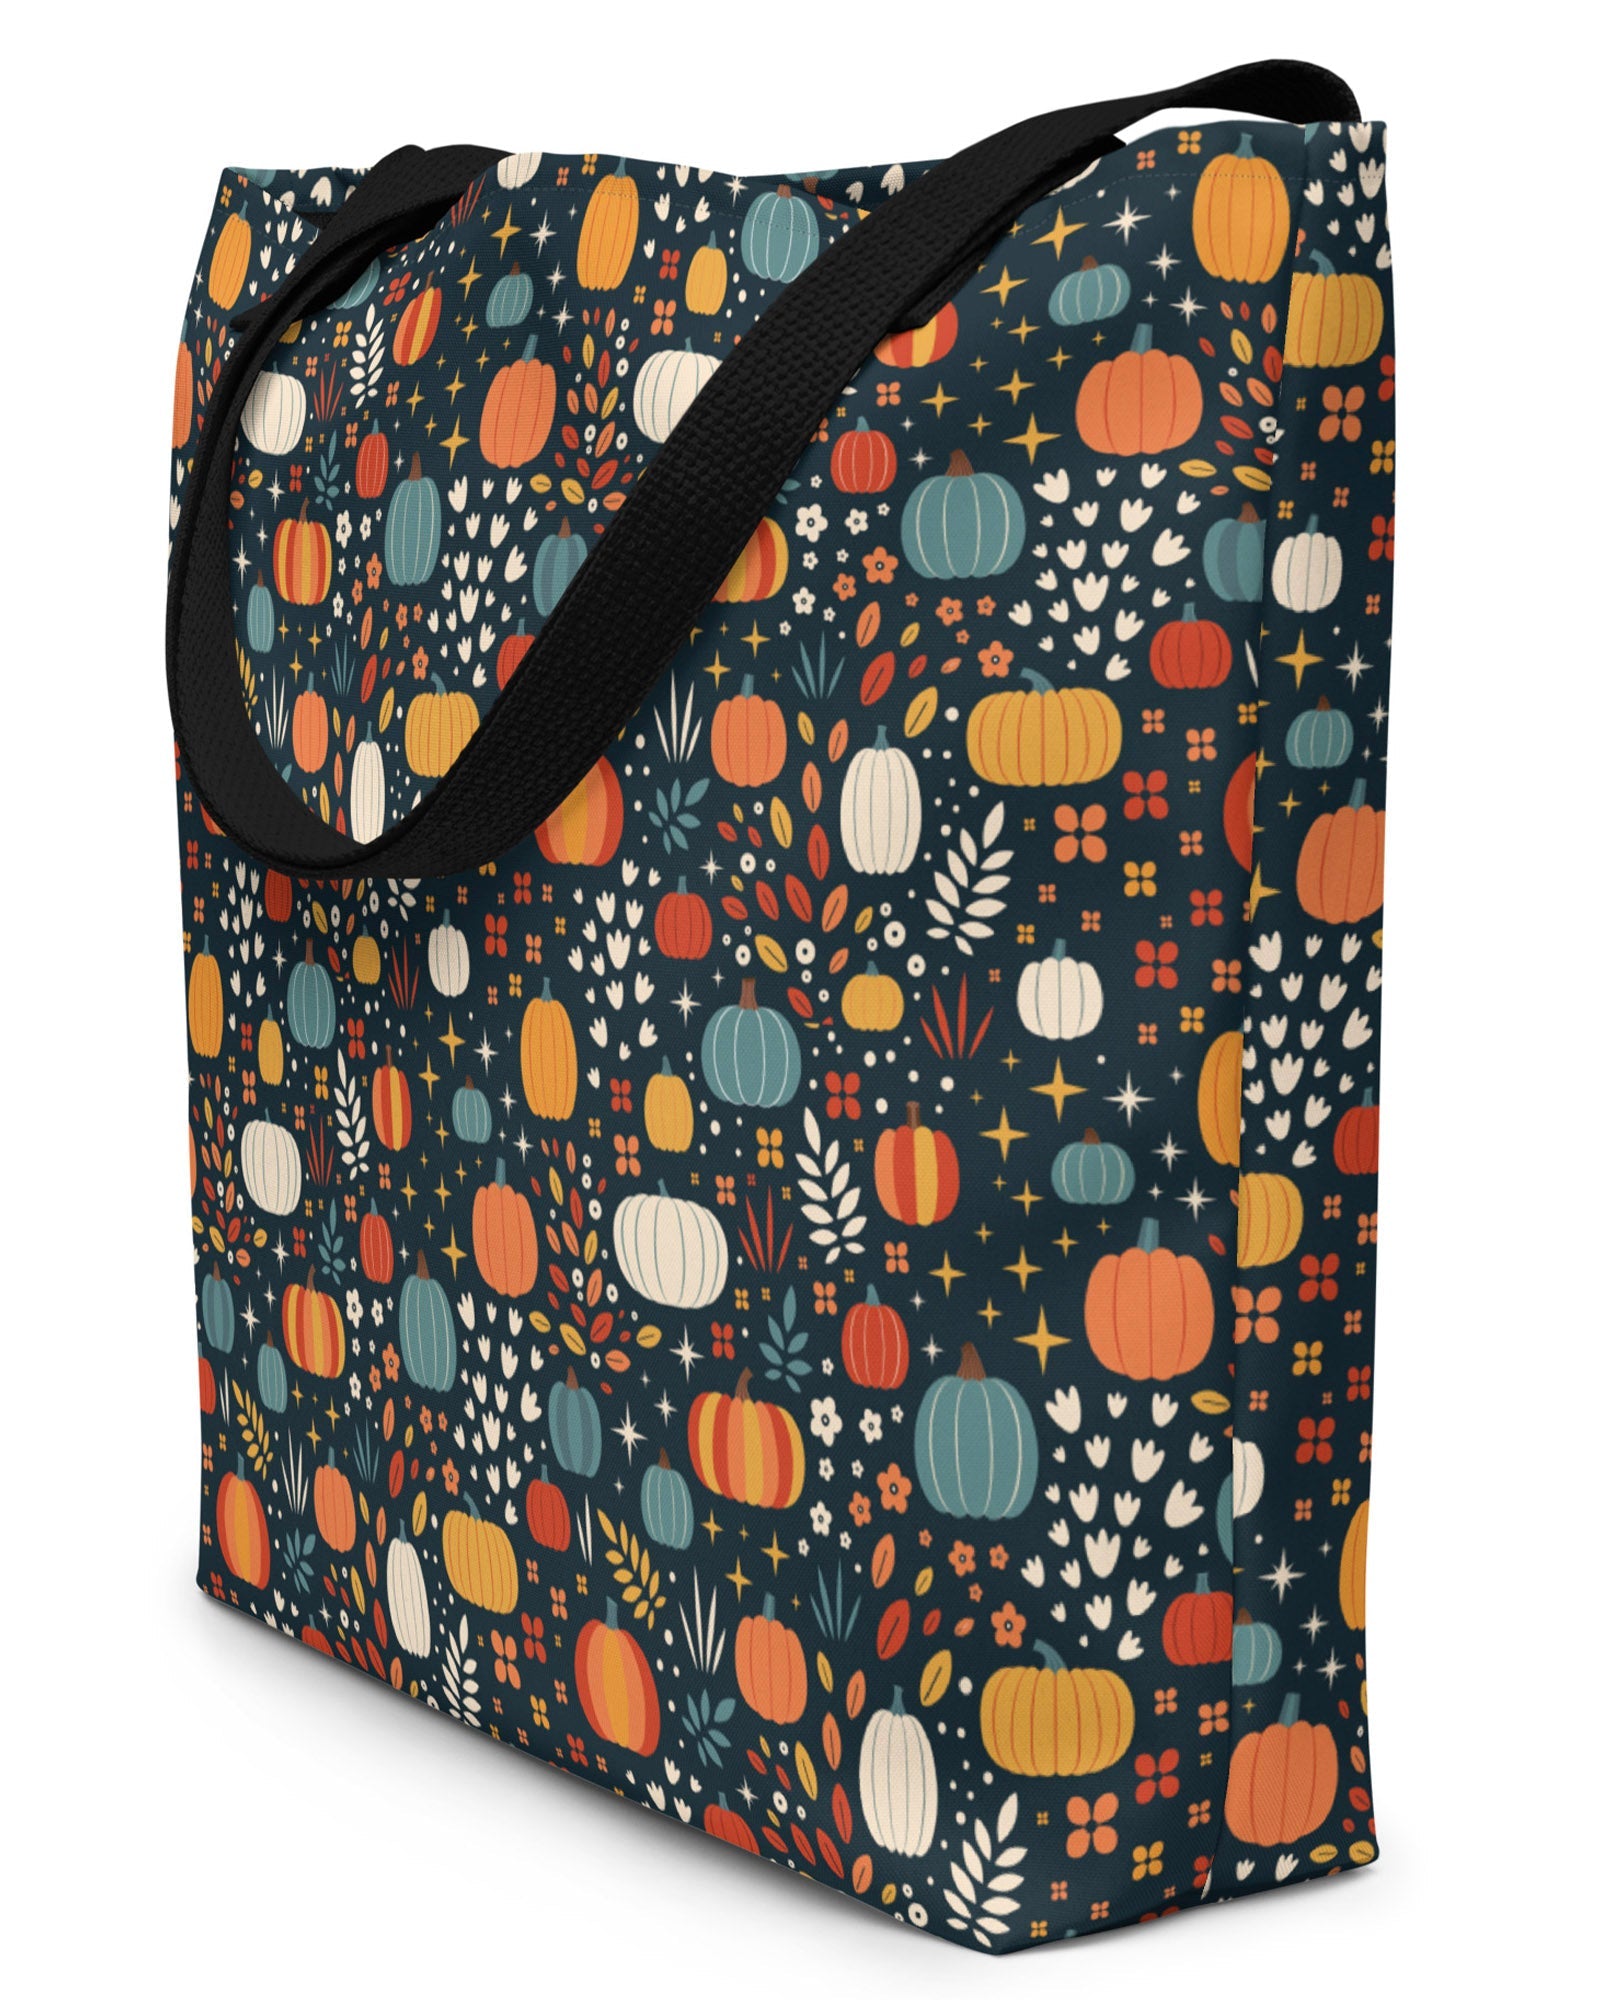 Gourd Gathering Open Tote Bag